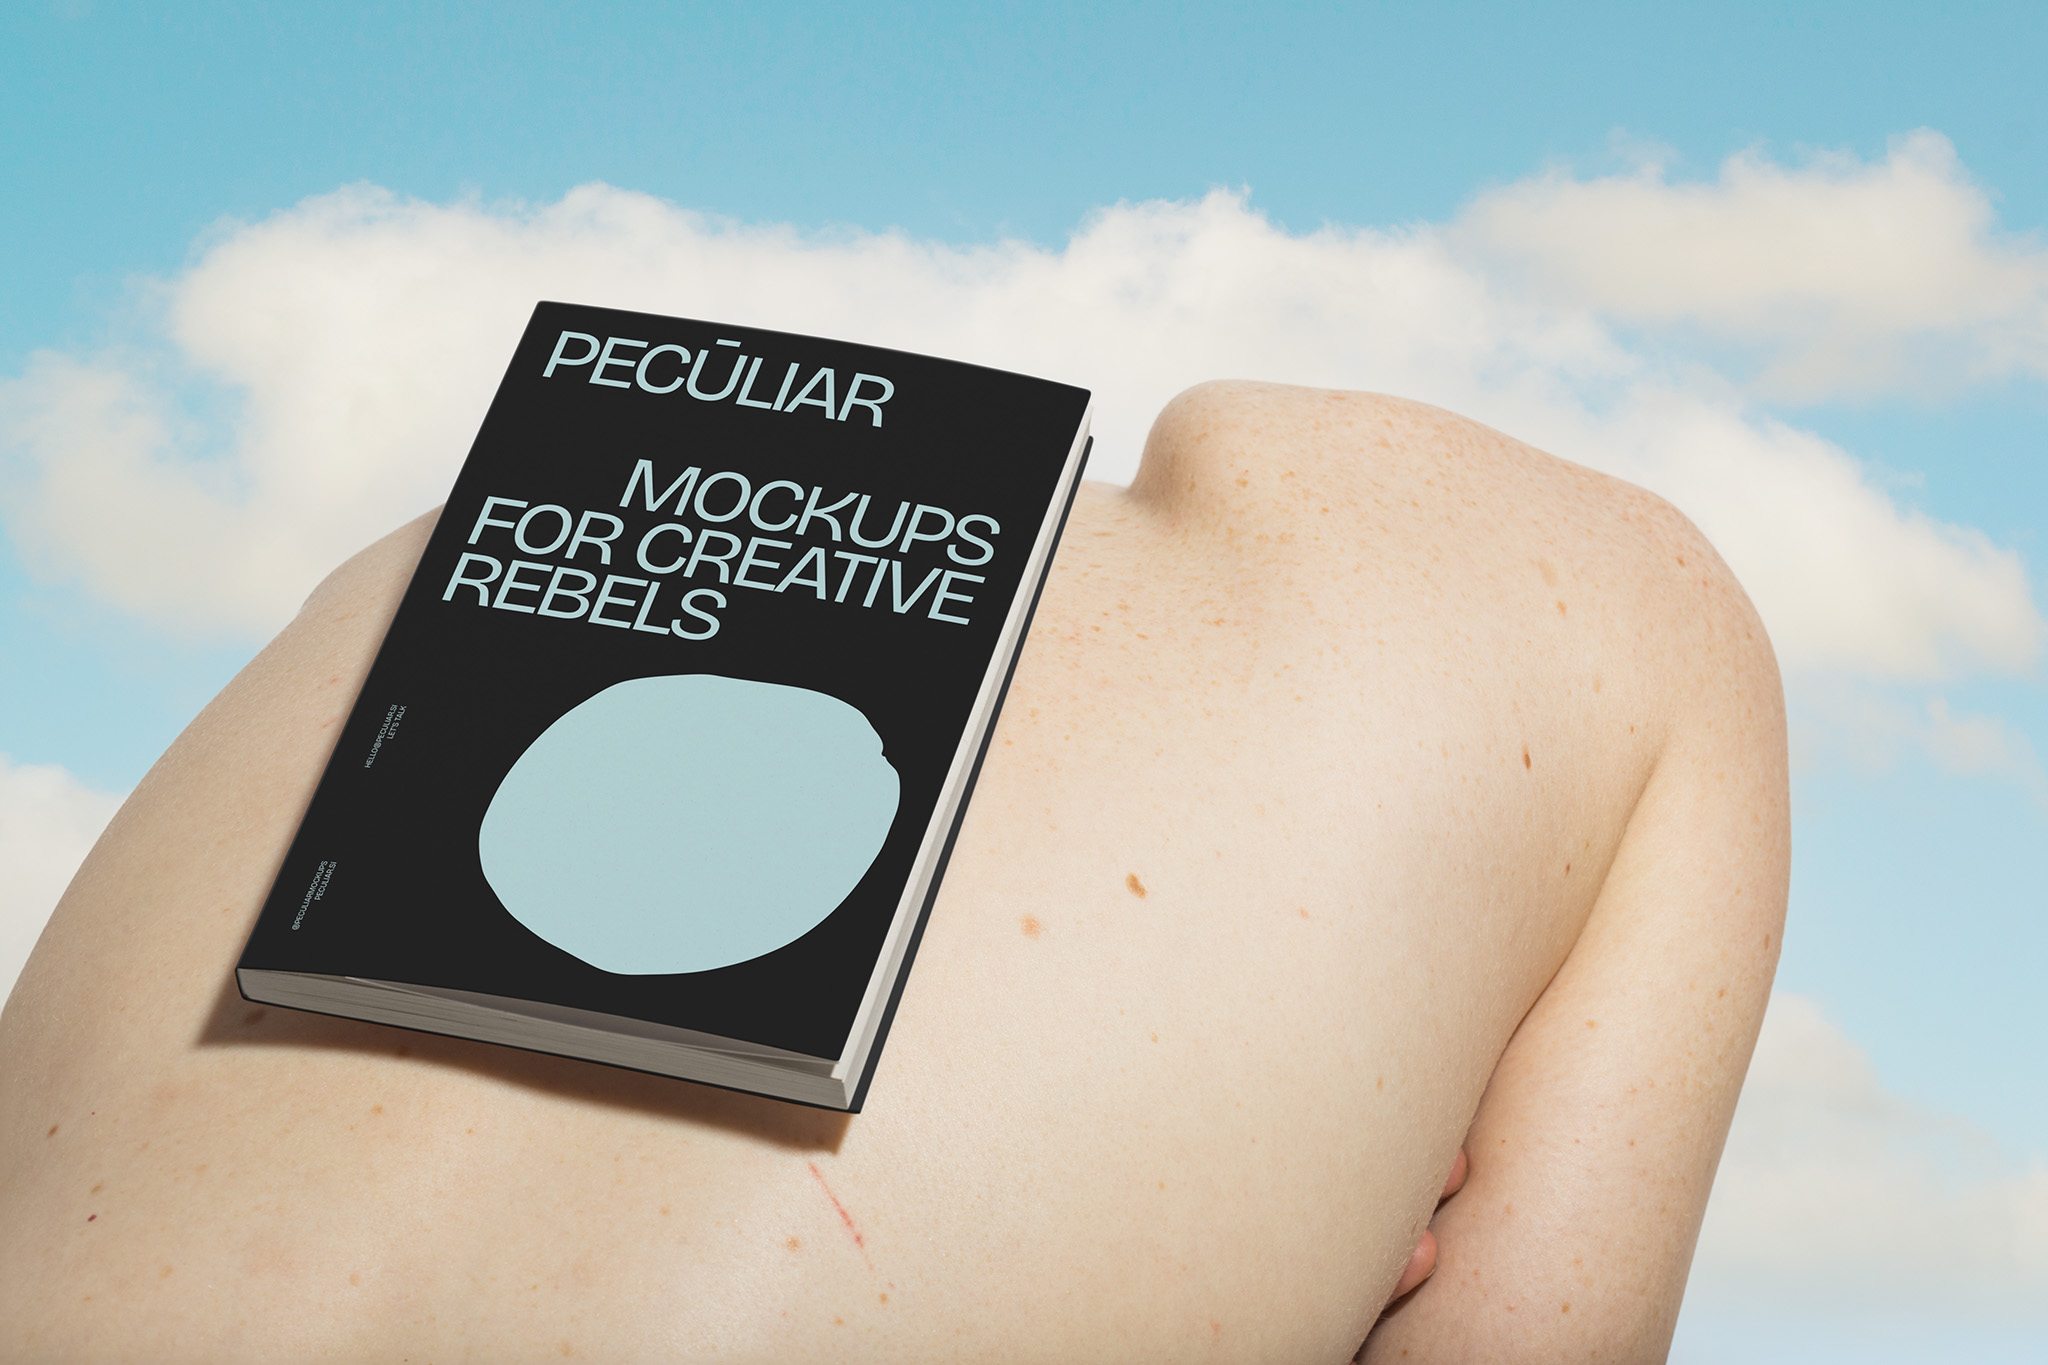 Slouched back bodyscape featuring an A5 book softcover mockup, set against a cloudy blue sky, in use example.